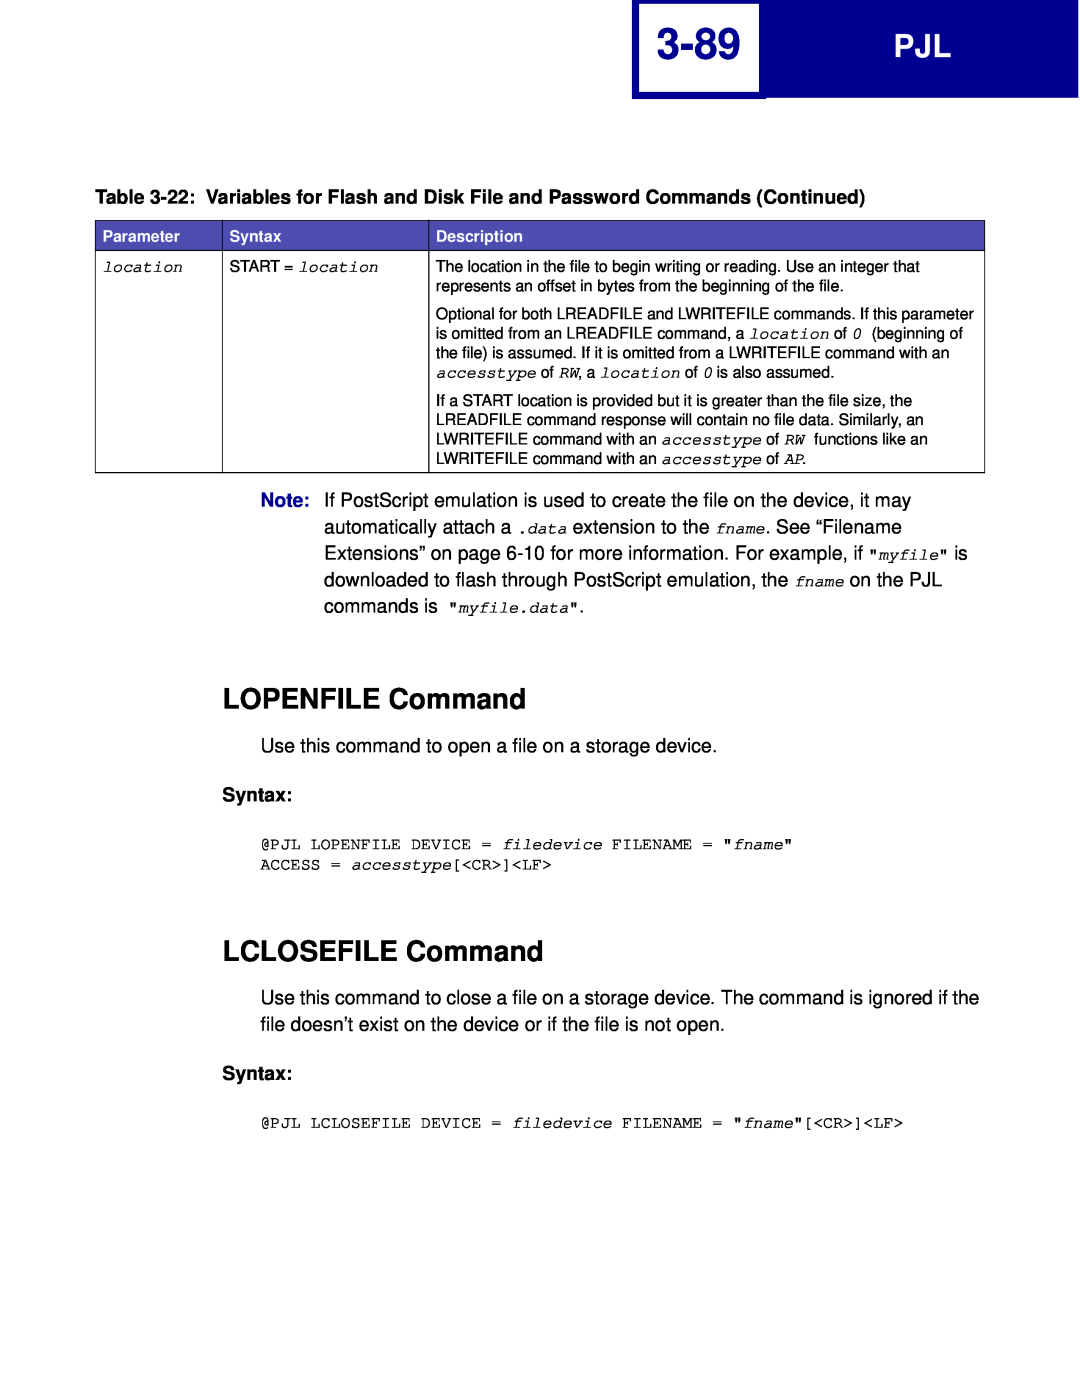 Lexmark C760, C762 manual 3-89, LOPENFILE Command, LCLOSEFILE Command, Syntax 